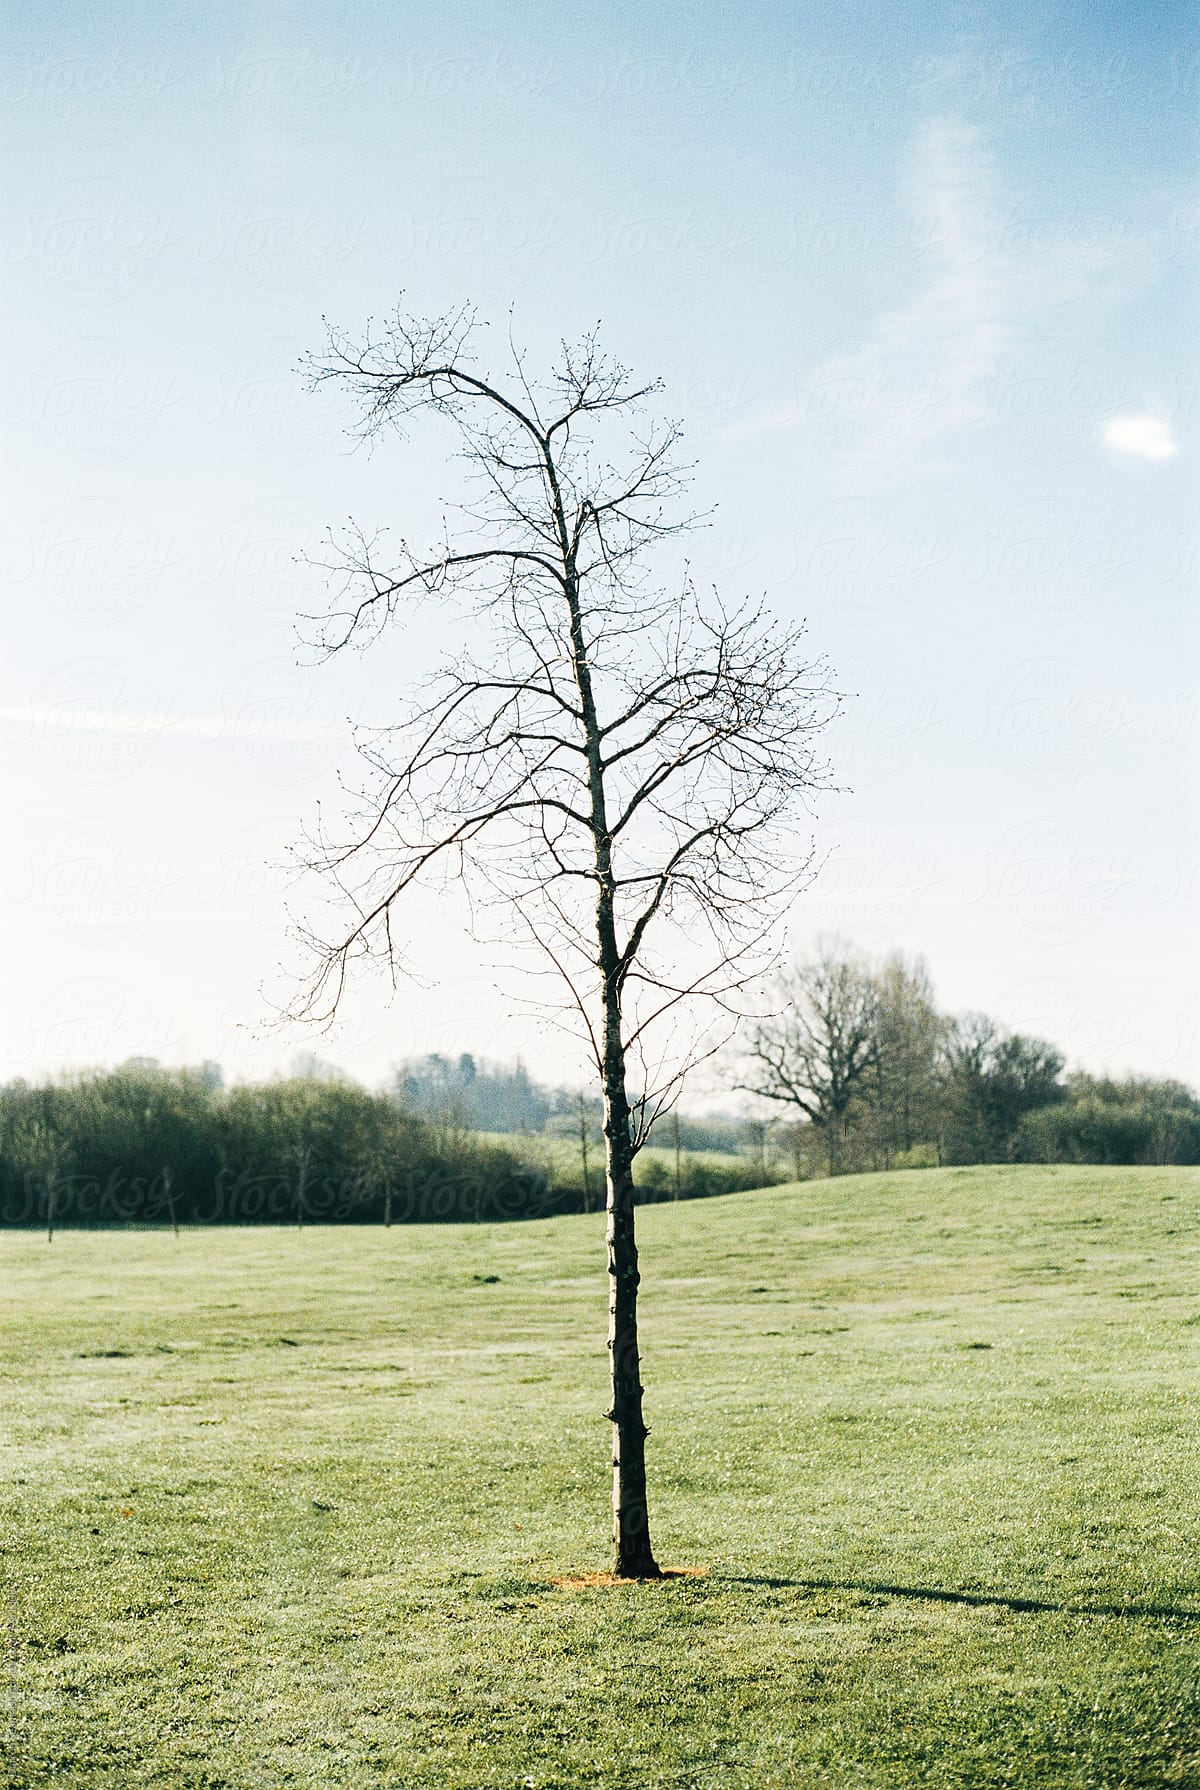 Leafless tree in a meadow on a bright day